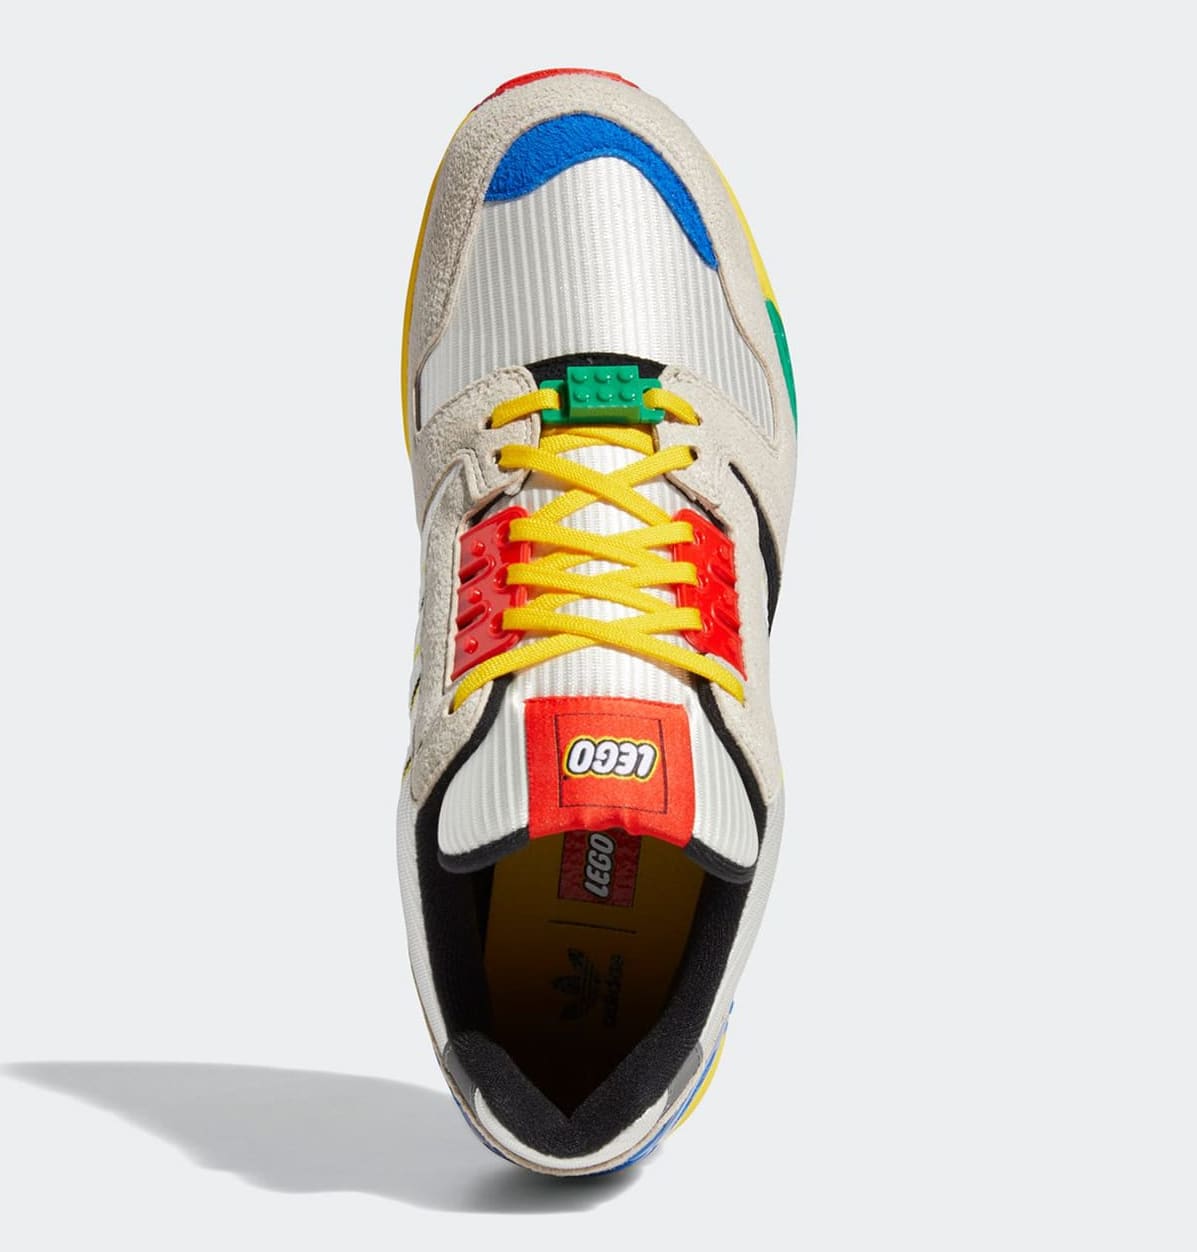 Lego X Adidas Zx 8000 Release Date Fz34 Sole Collector